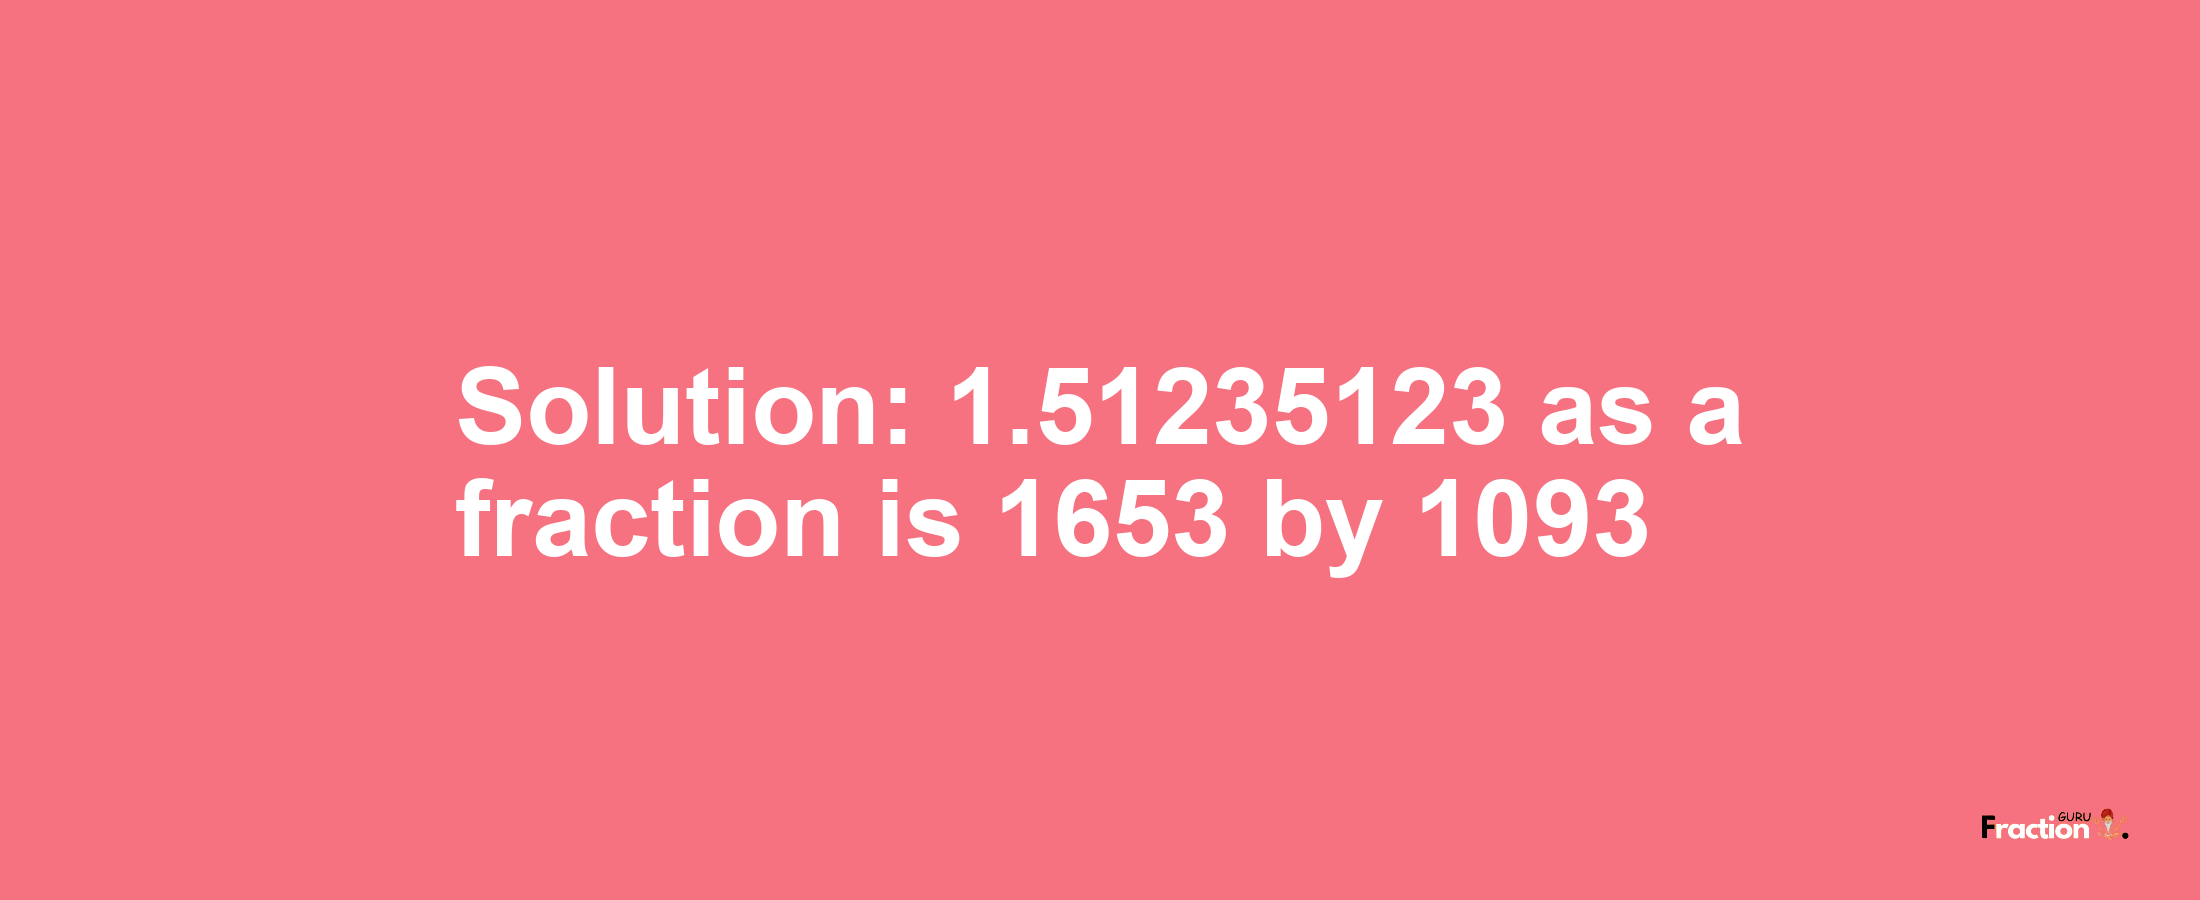 Solution:1.51235123 as a fraction is 1653/1093